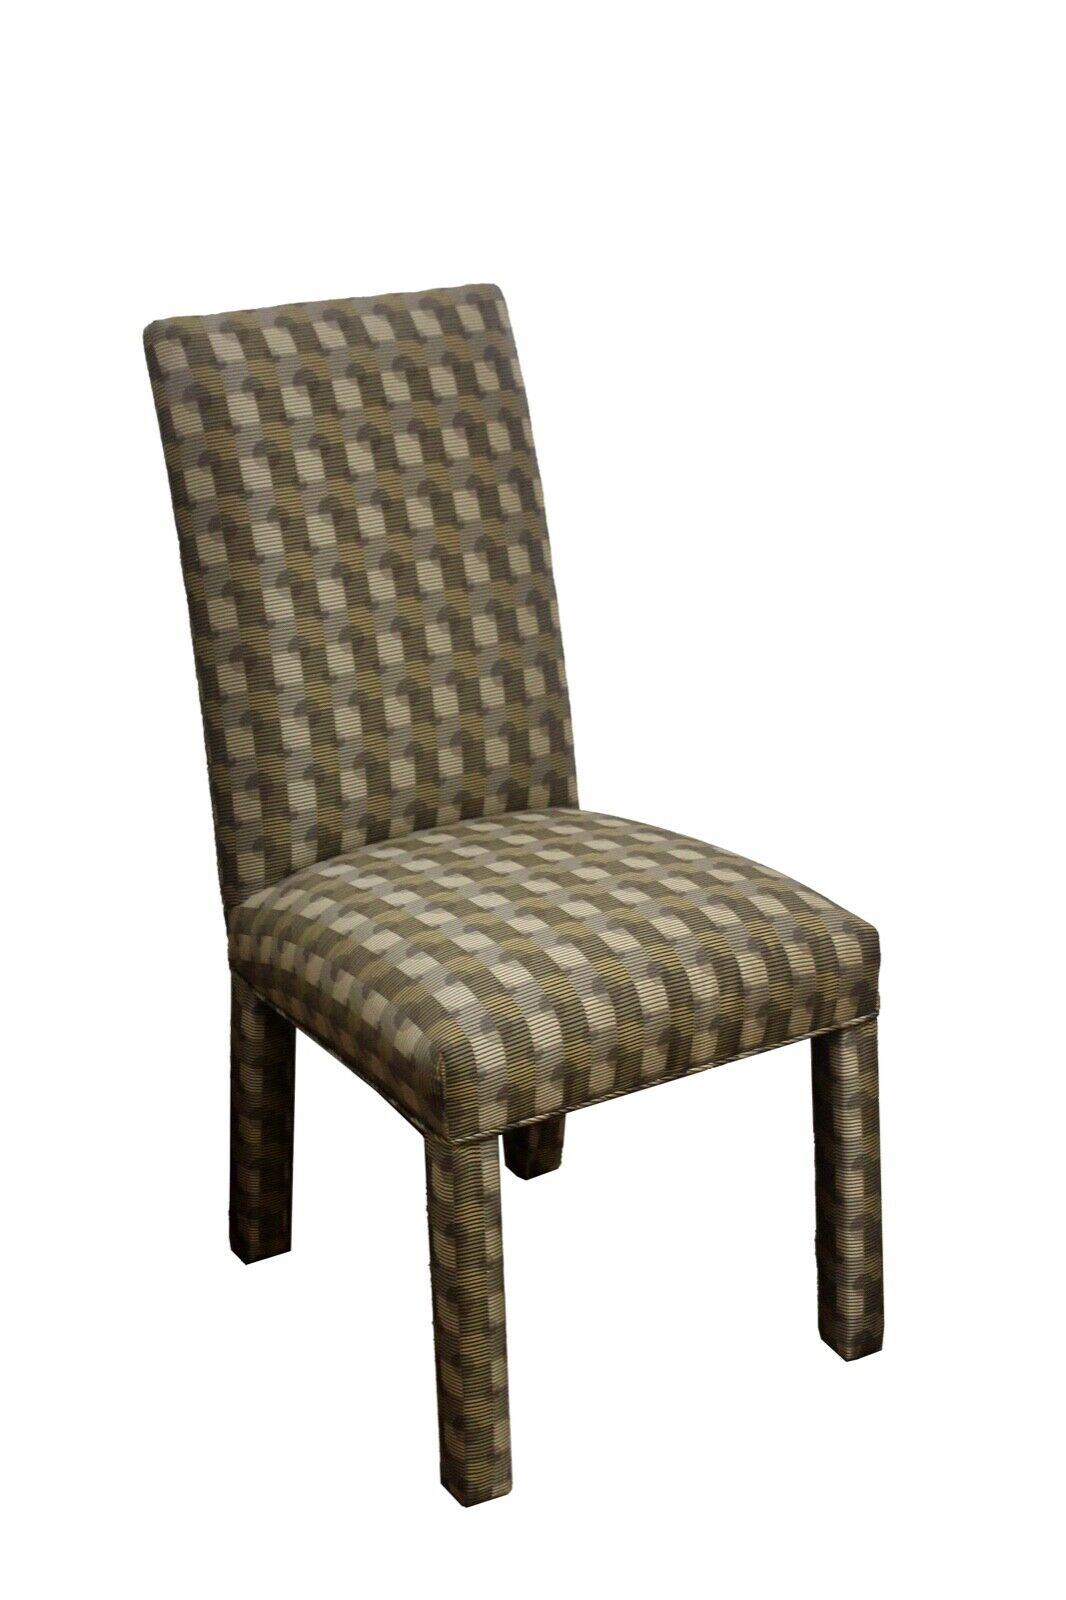 From Le Shoppe Too is a set of 6 upholstered Parson dining chairs in a fantastic geometric fabric in great condition. 
Dimensions: 20.5